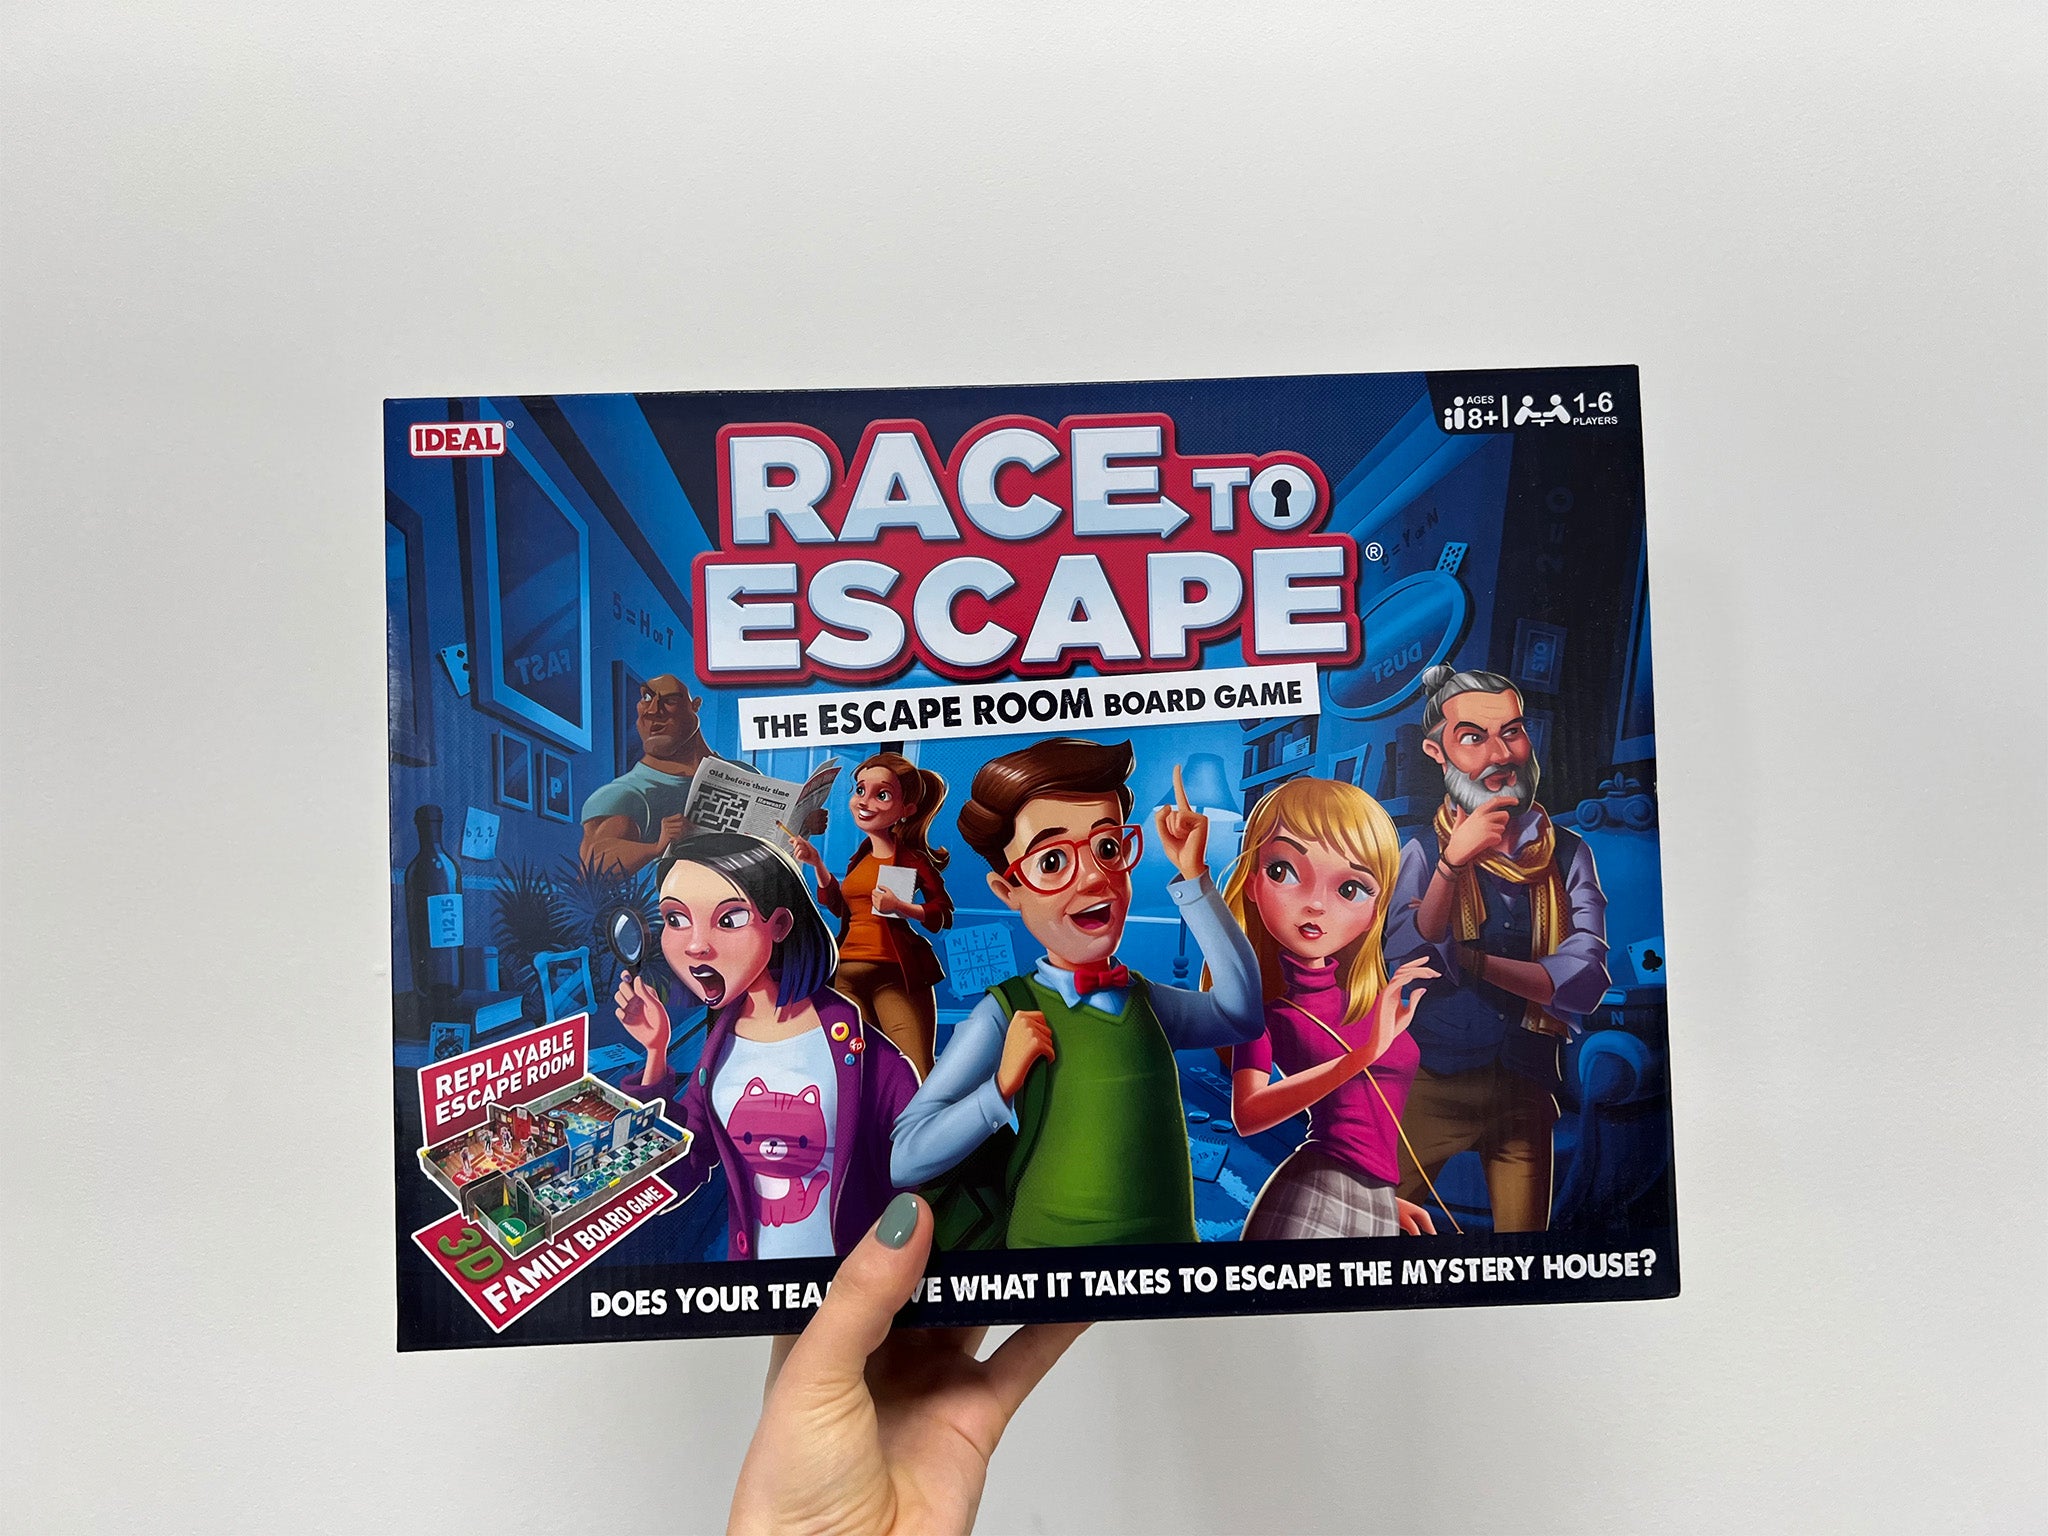 Race to escape: The 3D replayable escape room board game